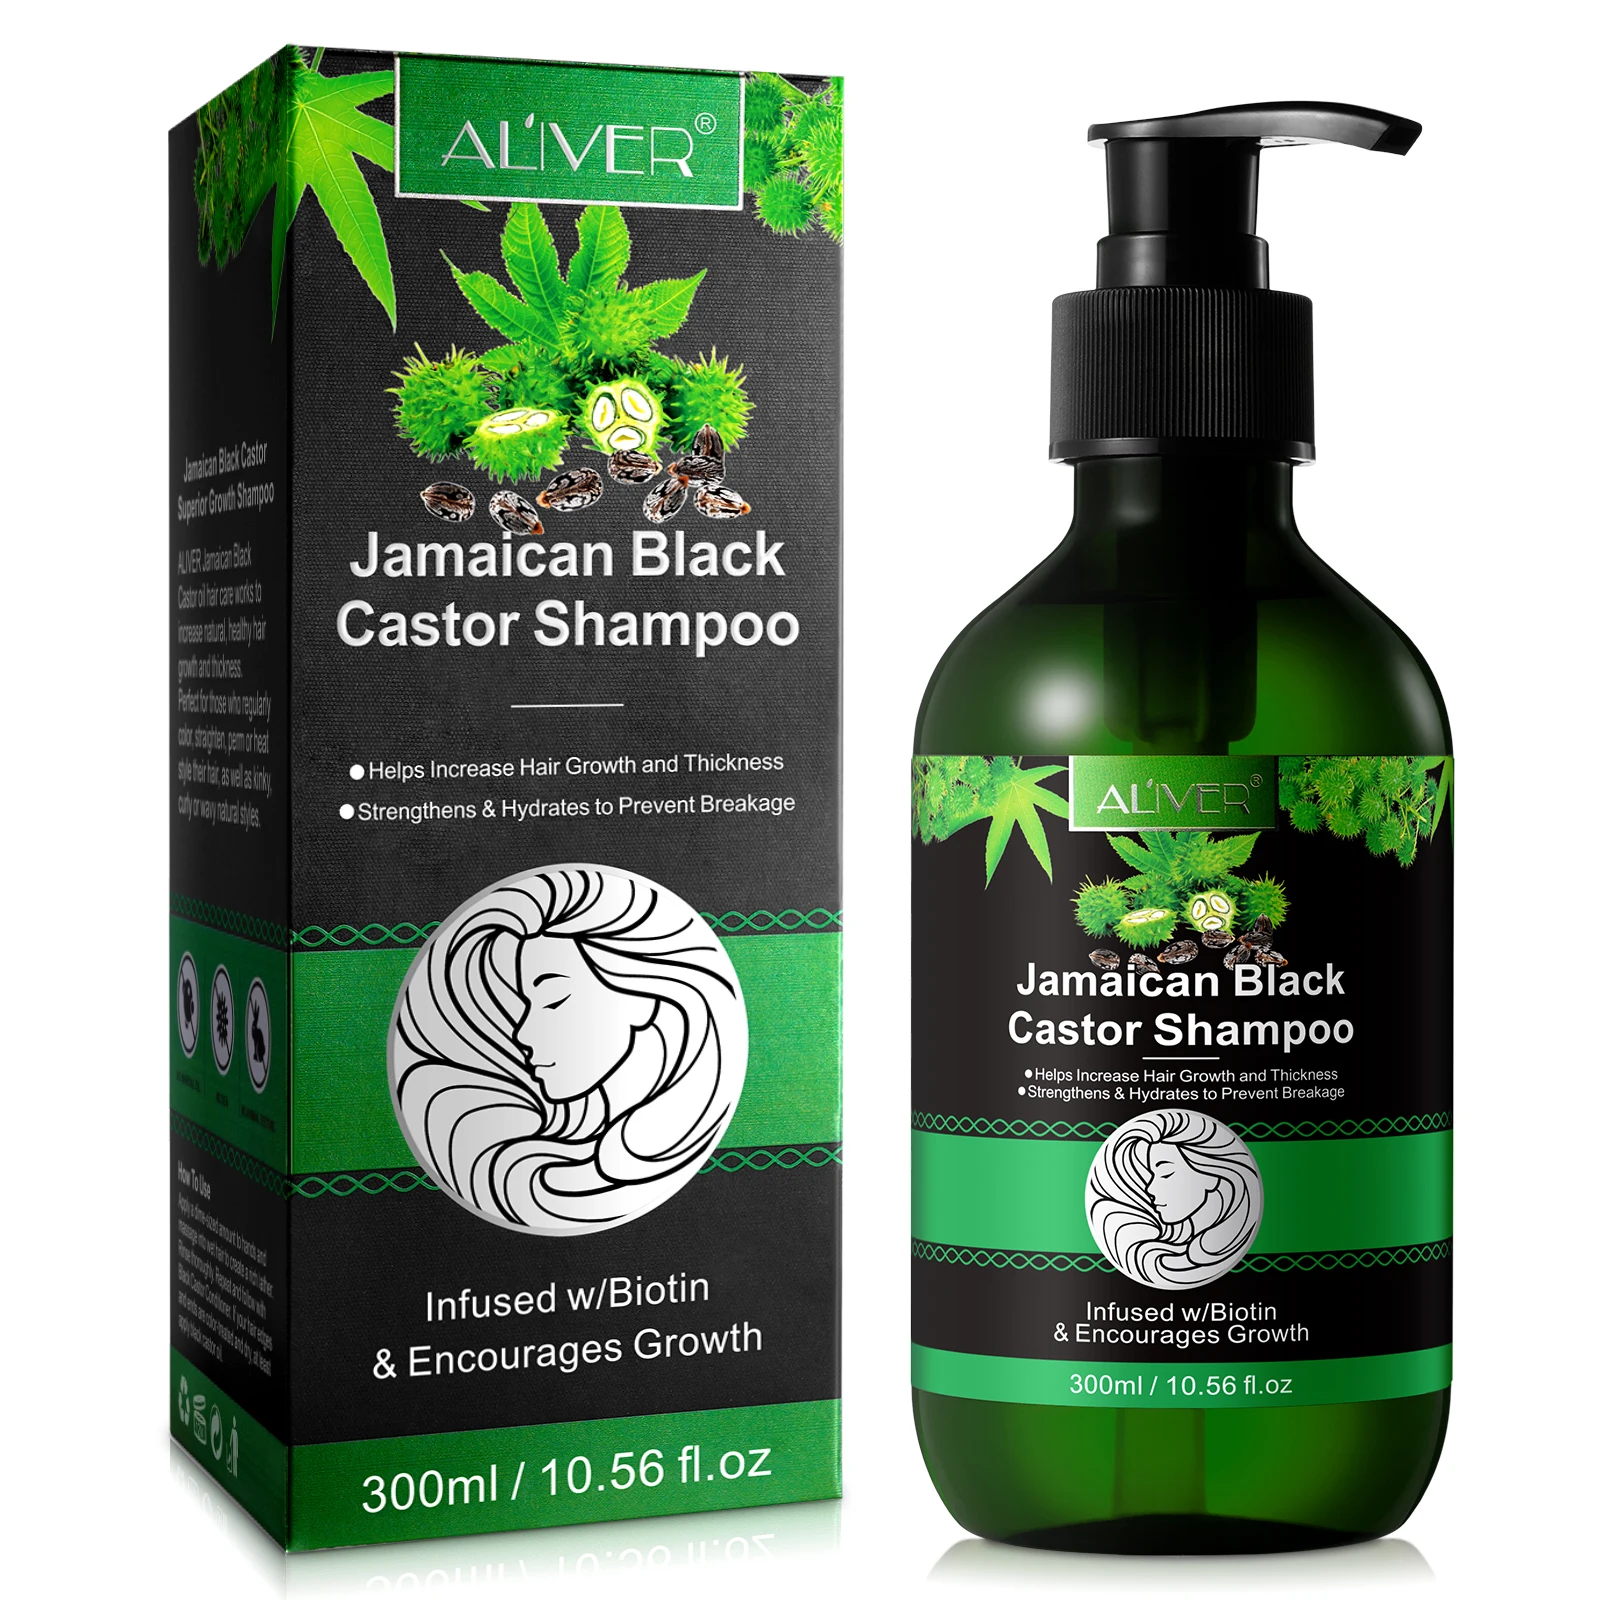 

ALIVER private label sulfate free shampoohair care prevent breakage natural organic black castor oil hair growth shampoo